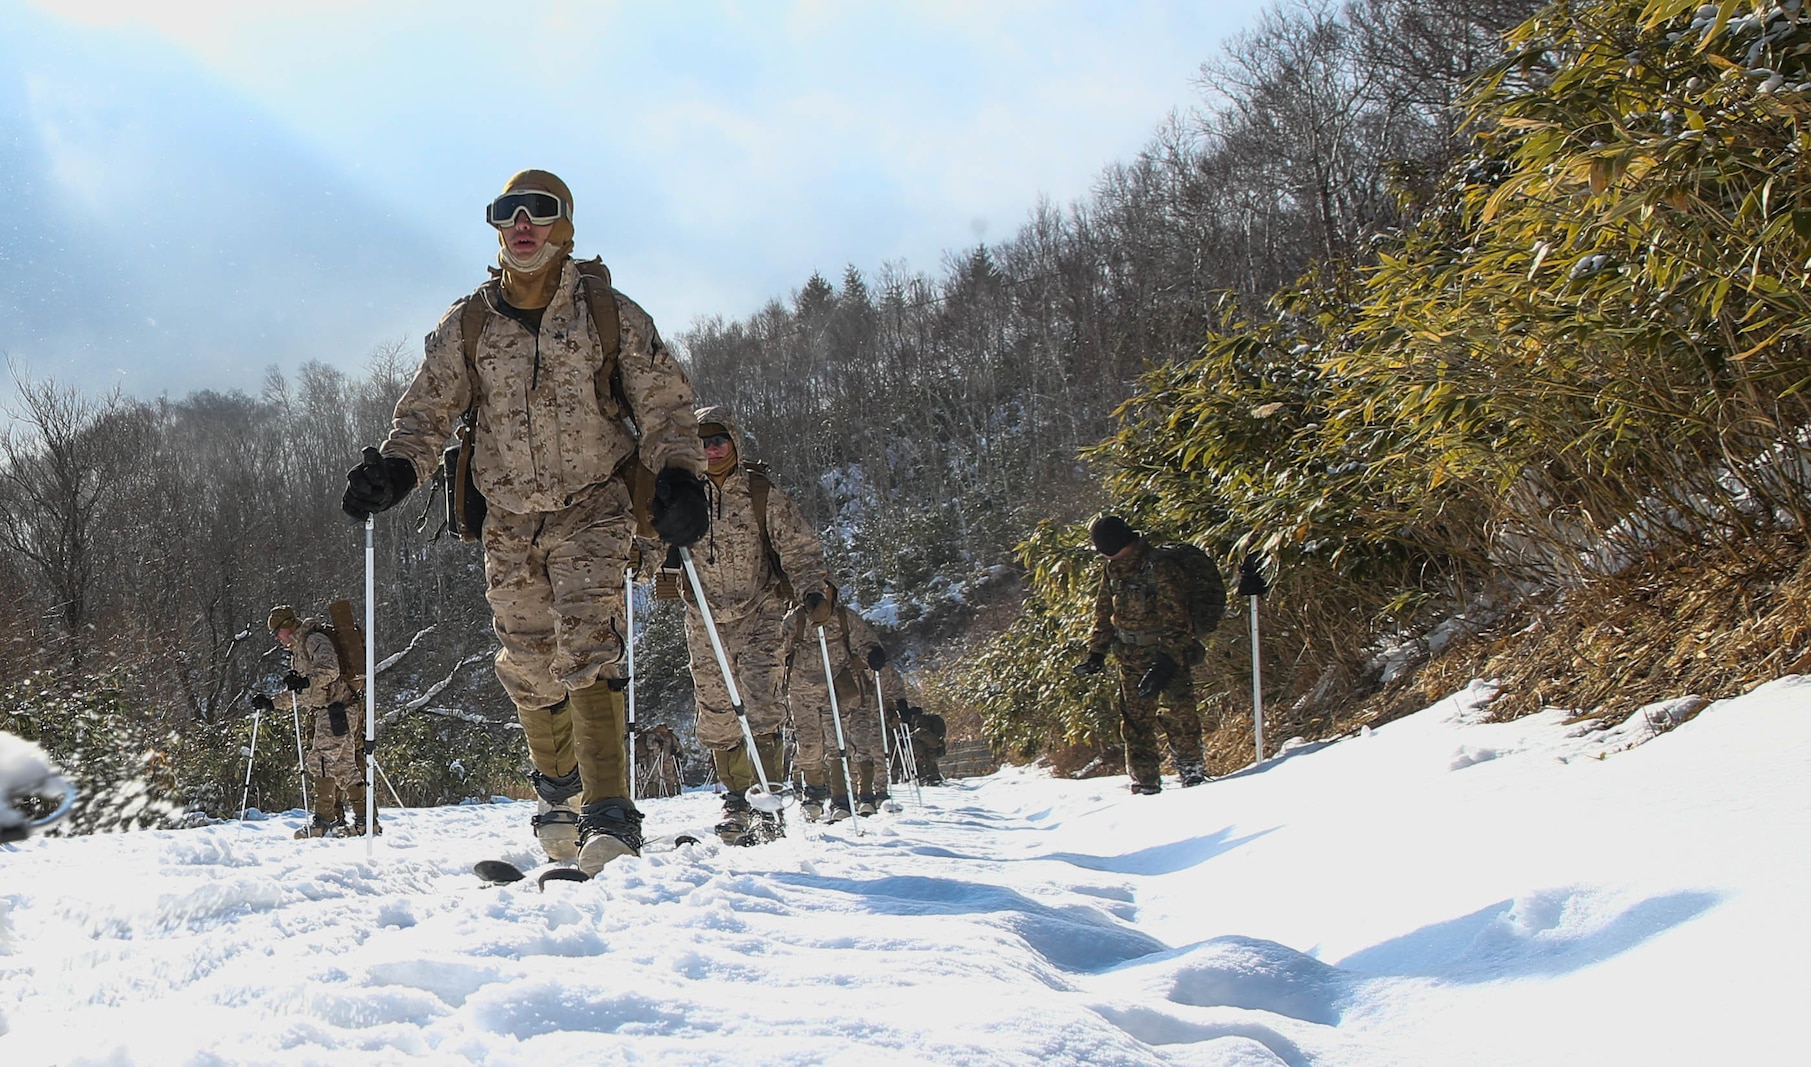 U.S. Marines from Golf Company, 2nd Battalion, 3rd Marine Regiment, 3rd Marine Division, conduct bilateral ski patrol training with Soldiers from 5th Brigade, Japan Ground Self-Defense Force (JGSDF), during exercise Northern Viper on Hokudaien Training Area, Hokkaido, Japan, Jan. 24, 2020. Northern Viper is a regularly scheduled training exercise that is designed to enhance the collective defense capabilities of the U.S. and Japan Alliance by exposing members of both forces to intense training in an austere environment, allowing them to perfect their skills in any clime and place. (U.S. Marine Corps Photo By Cpl. Cameron E. Parks)